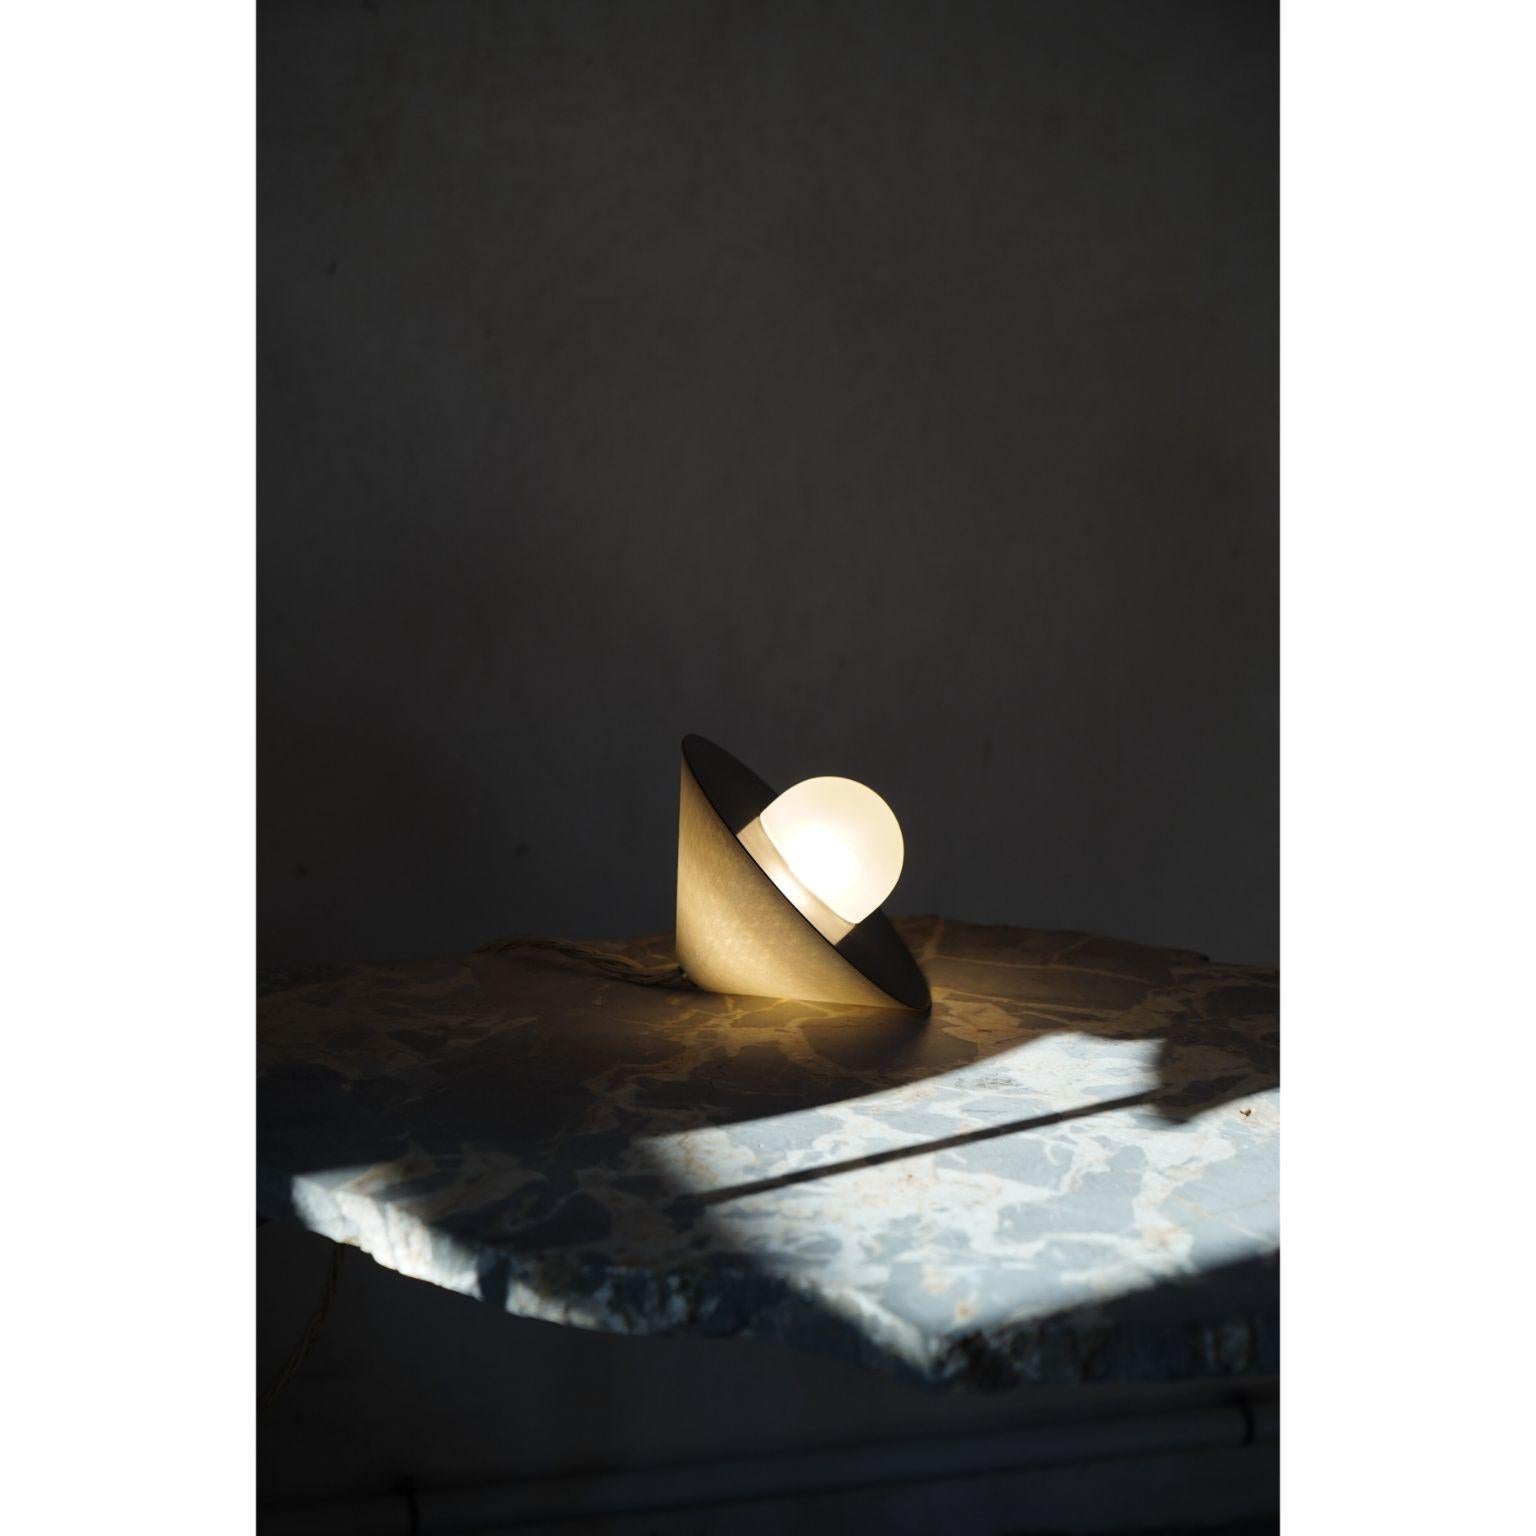 Alba Top Table Lamp XL by Contain
Dimensions: D 22 x W 15 x H 12 cm.
Materials: brass, 3D printed PLA structure and optical lens.

Also available in different finishes and dimensions (Ø 22 cm and Ø 15 cm). Please contact us.

All our lamps can